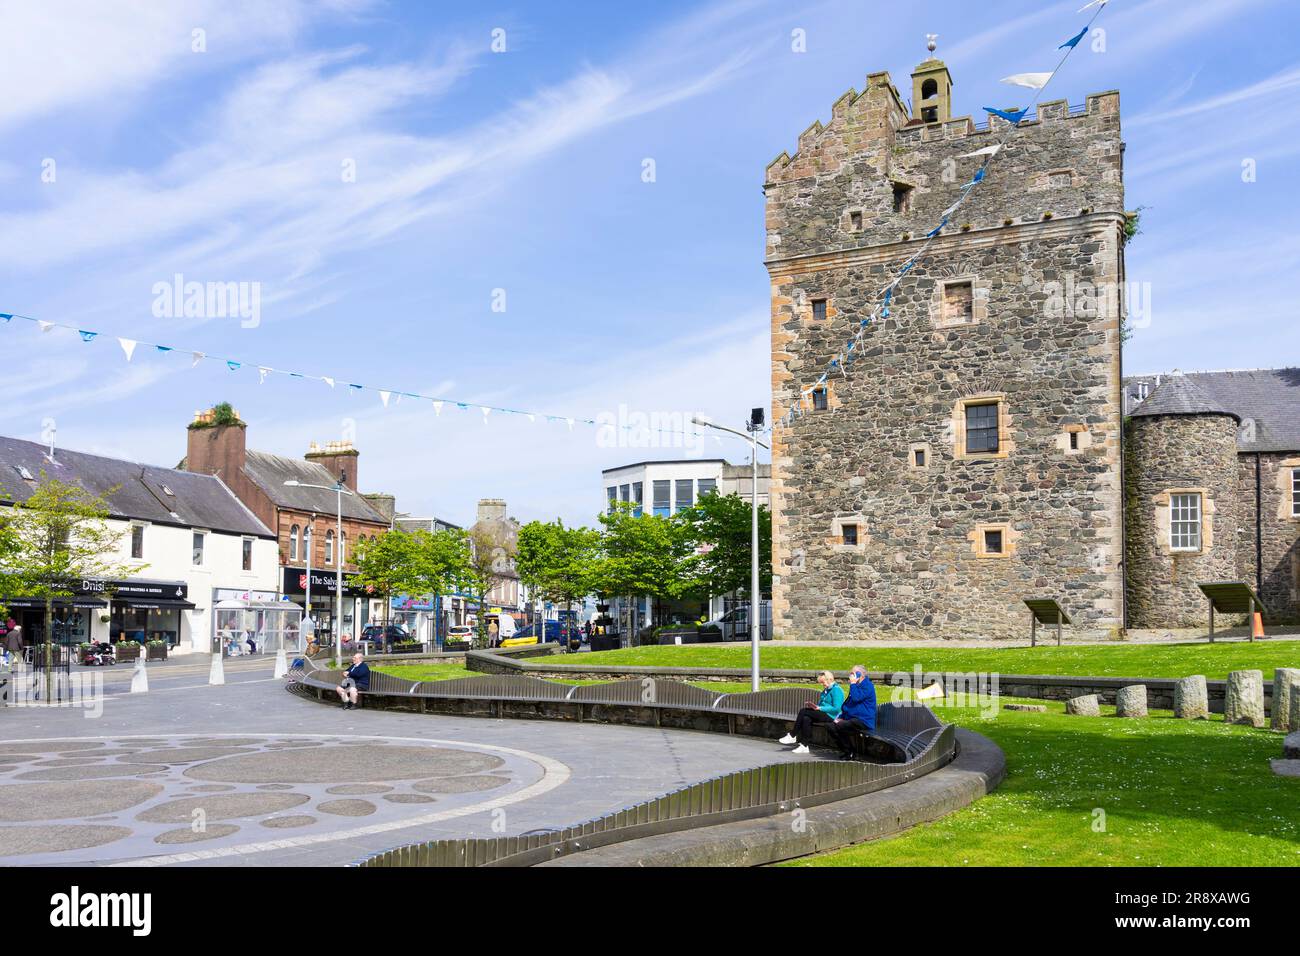 Stranraer town centre and the The Castle of St John a medieval tower house Stranraer Wigtownshire Scotland UK GB Europe Stock Photo